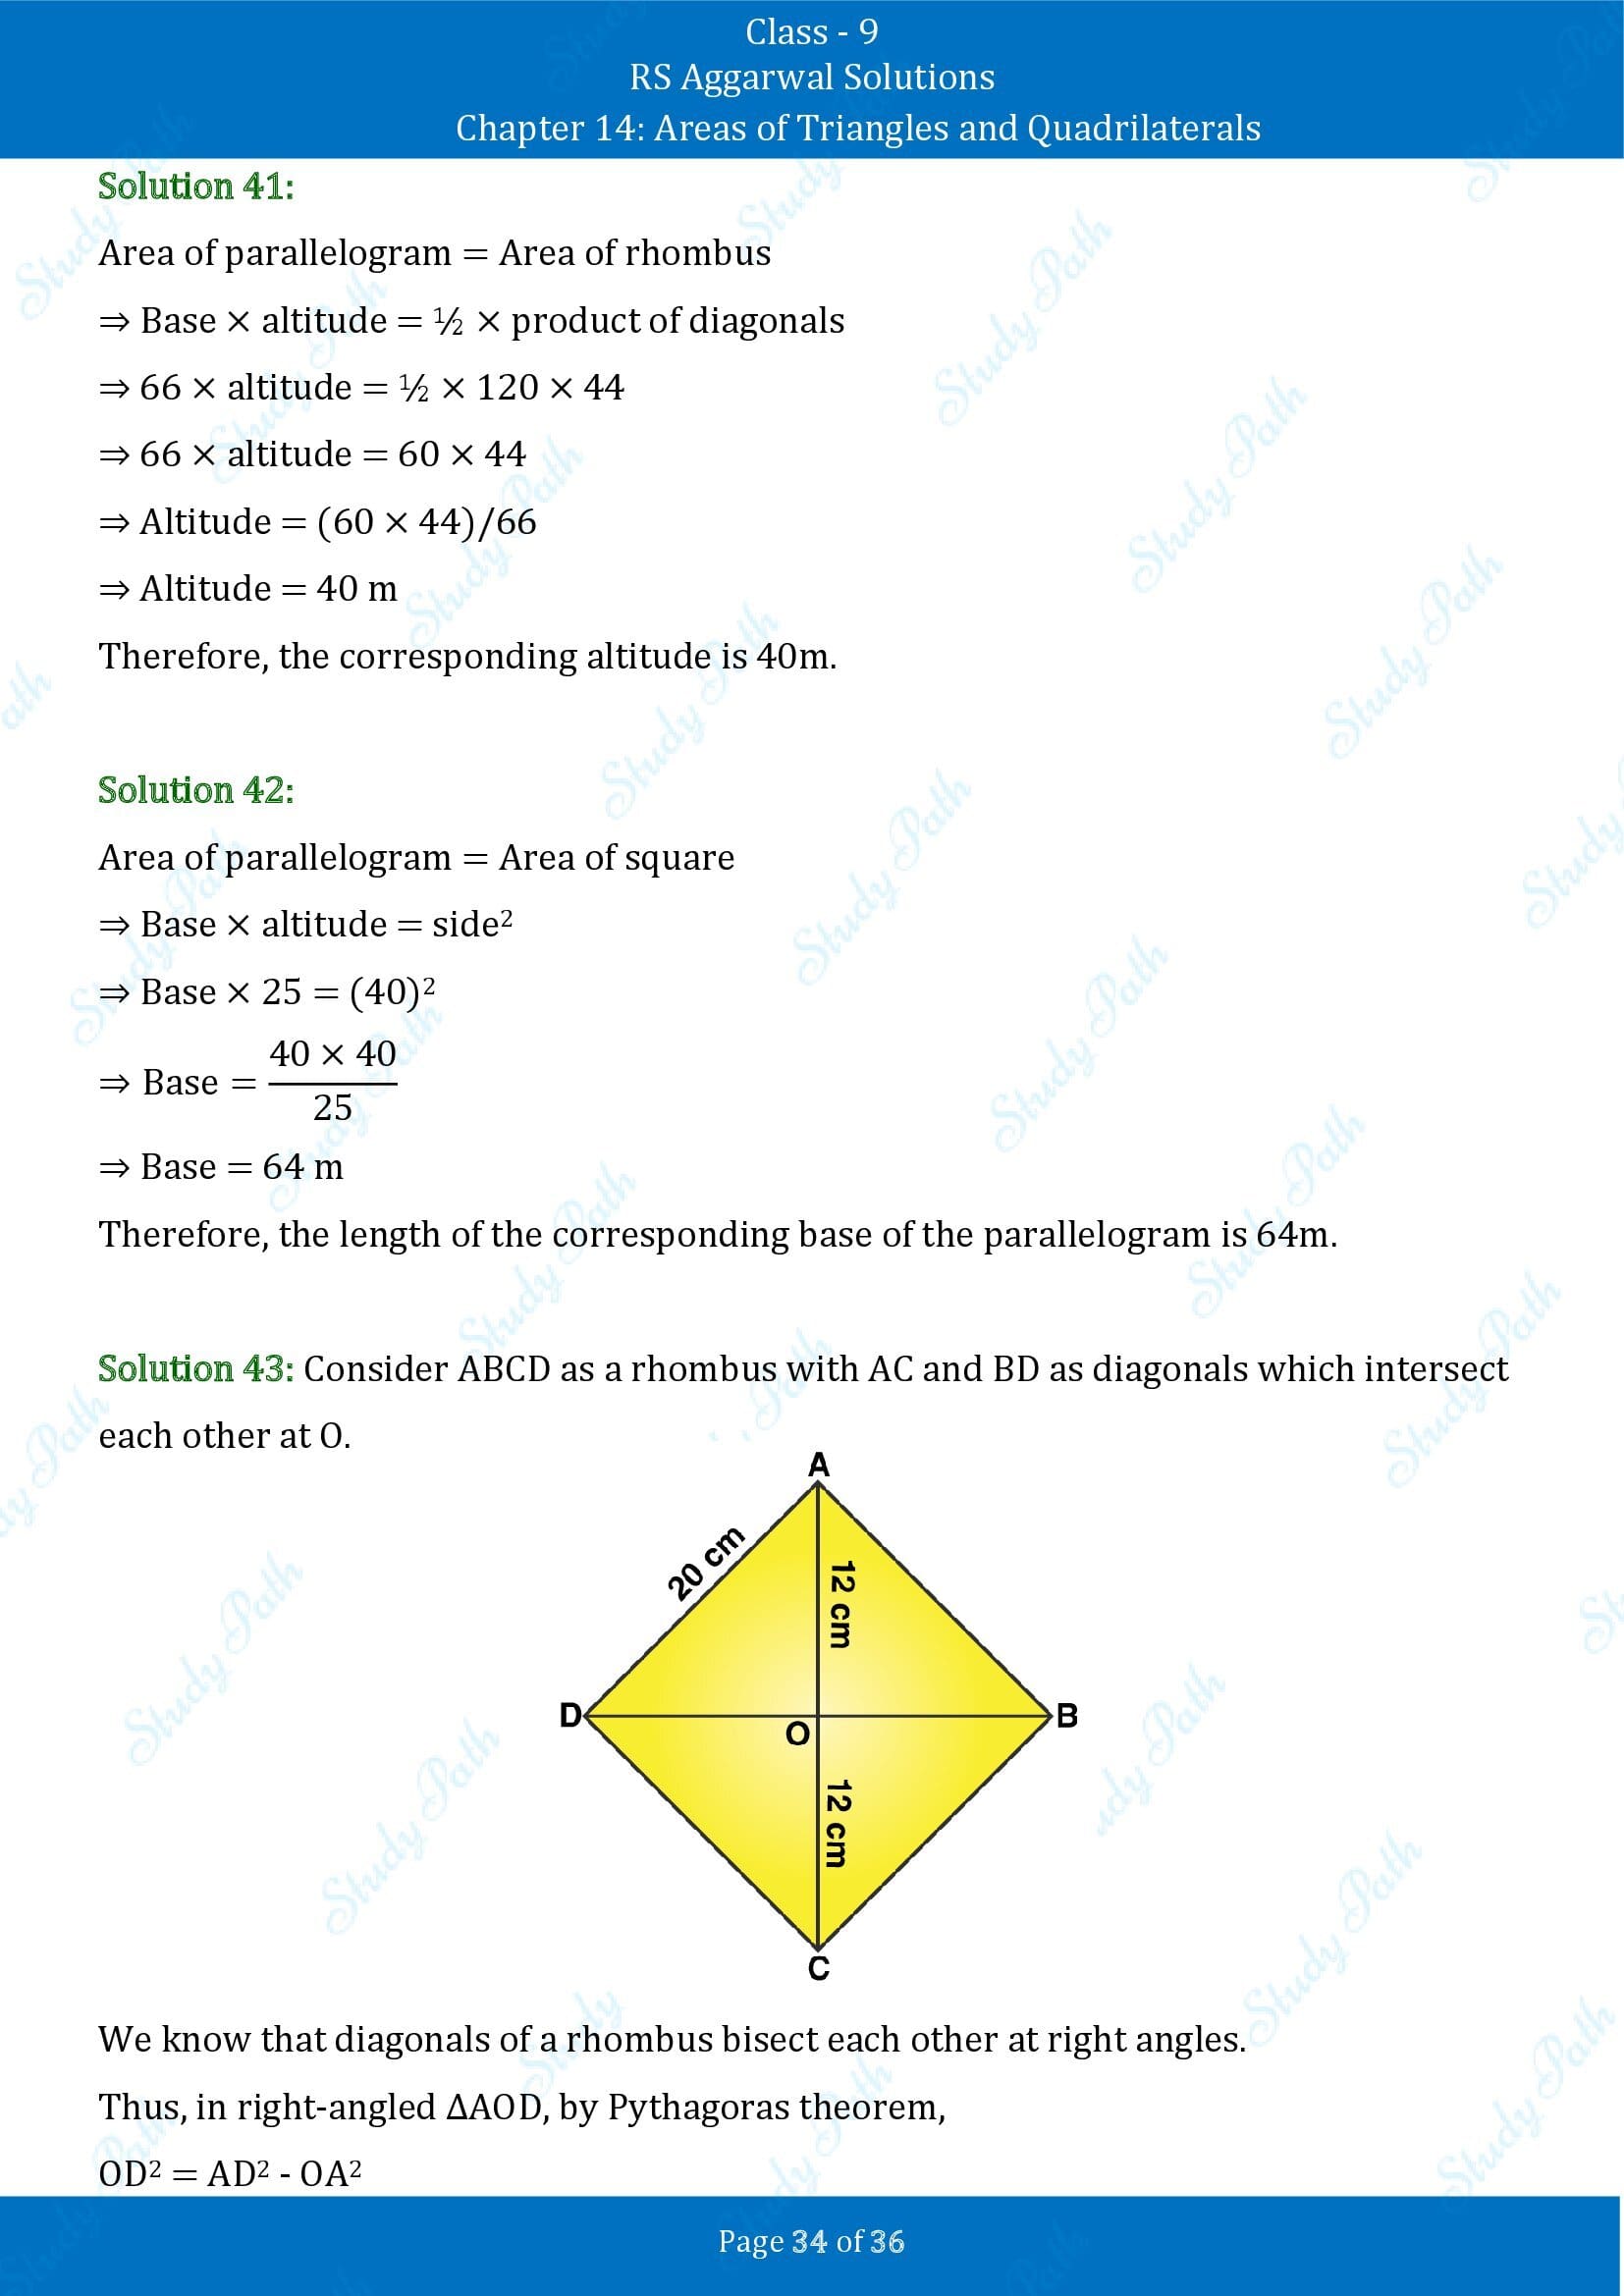 RS Aggarwal Solutions Class 9 Chapter 14 Areas of Triangles and Quadrilaterals Exercise 14 00034